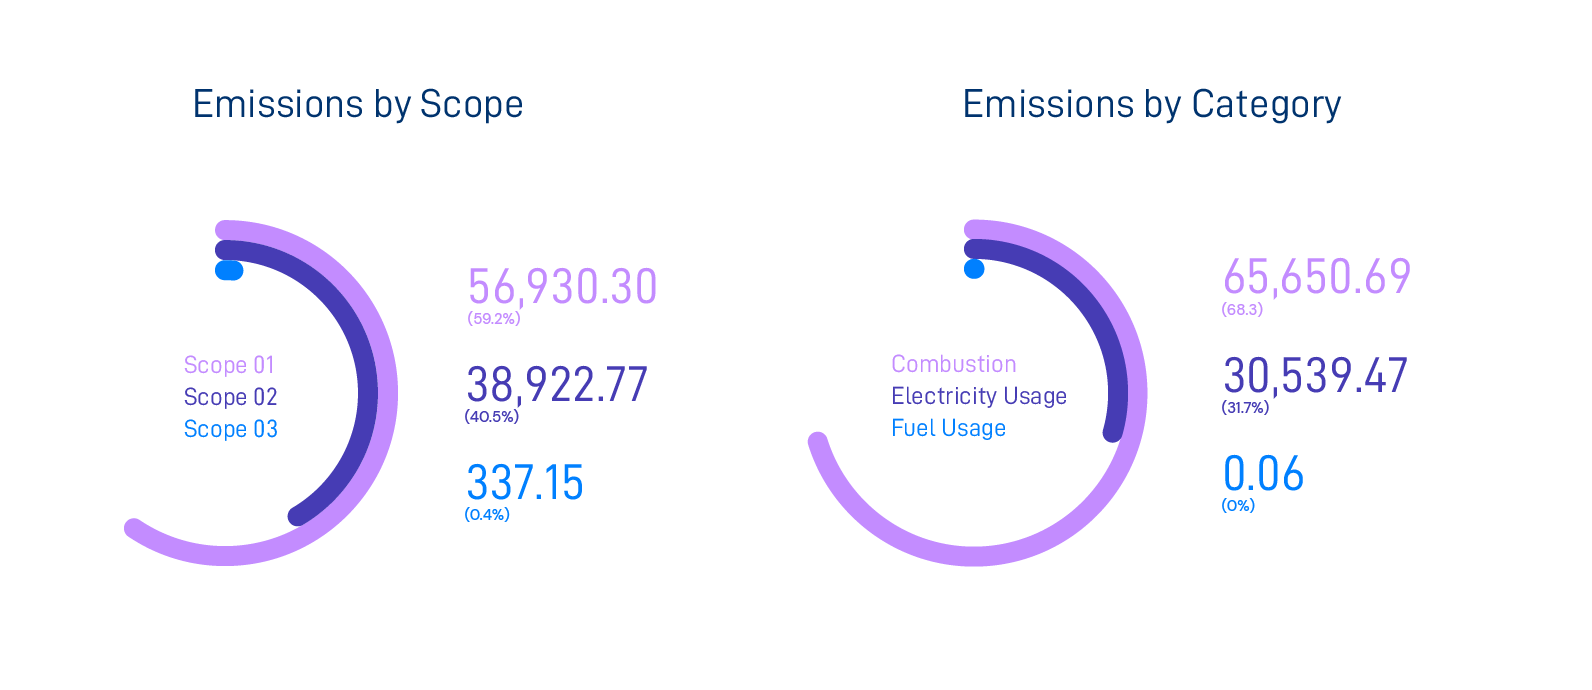 Emissions by Scope and Category